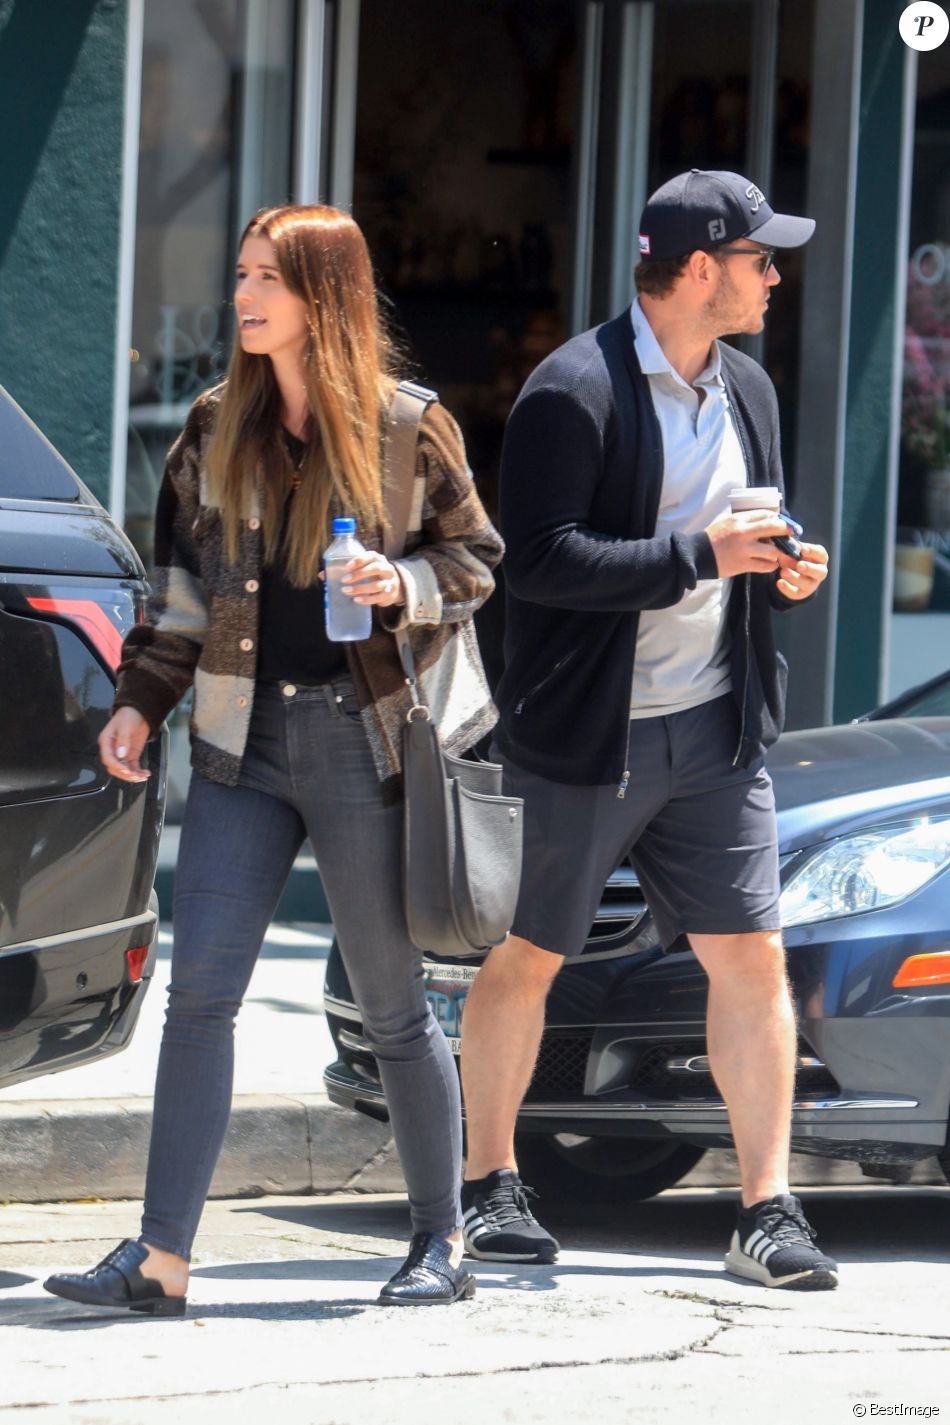 Exclusif - Chris Pratt et sa fiancée Katherine Schwarzenegger s&#039;embrassent dans les rues de West Hollywood, le 25 avril 2019.  For germany call for price Exclusive - Lovebirds Chris Pratt and Katherine Schwarzenegger share a kiss after a coffee run in West Hollywood. 25th april 2019.25/04/2019 - Los Angeles